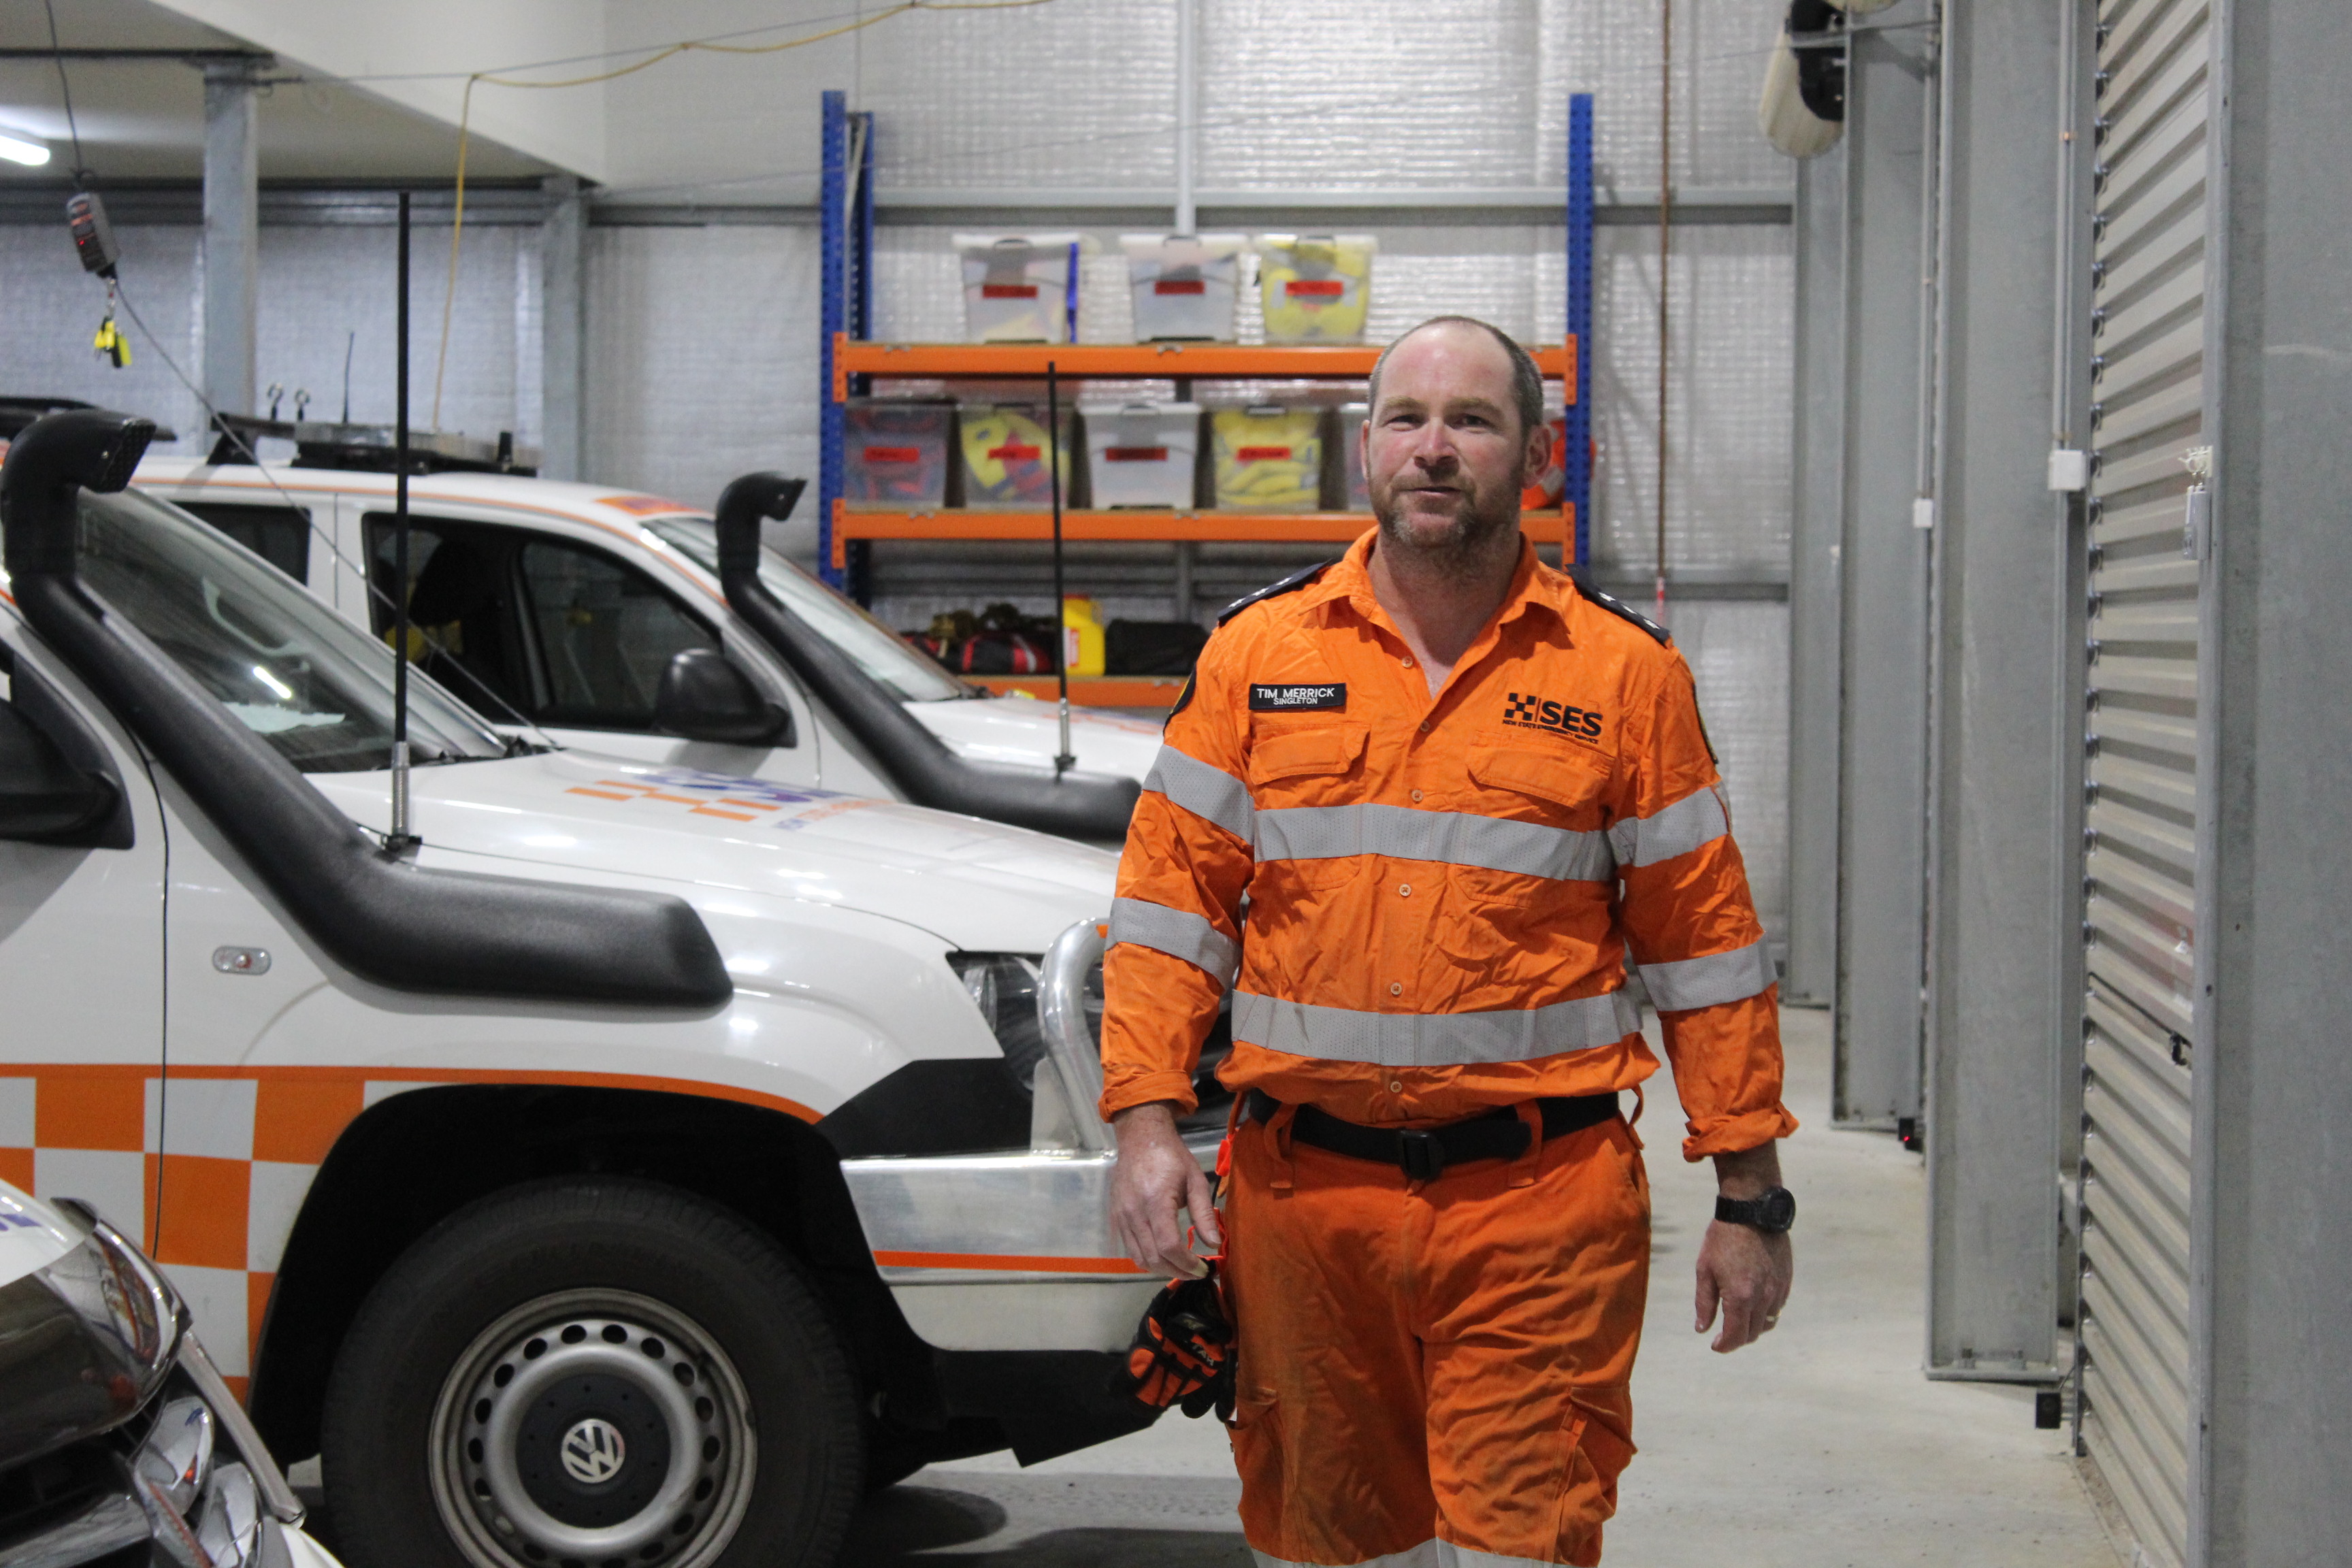 SES Singleton respond to 18 callouts in one day